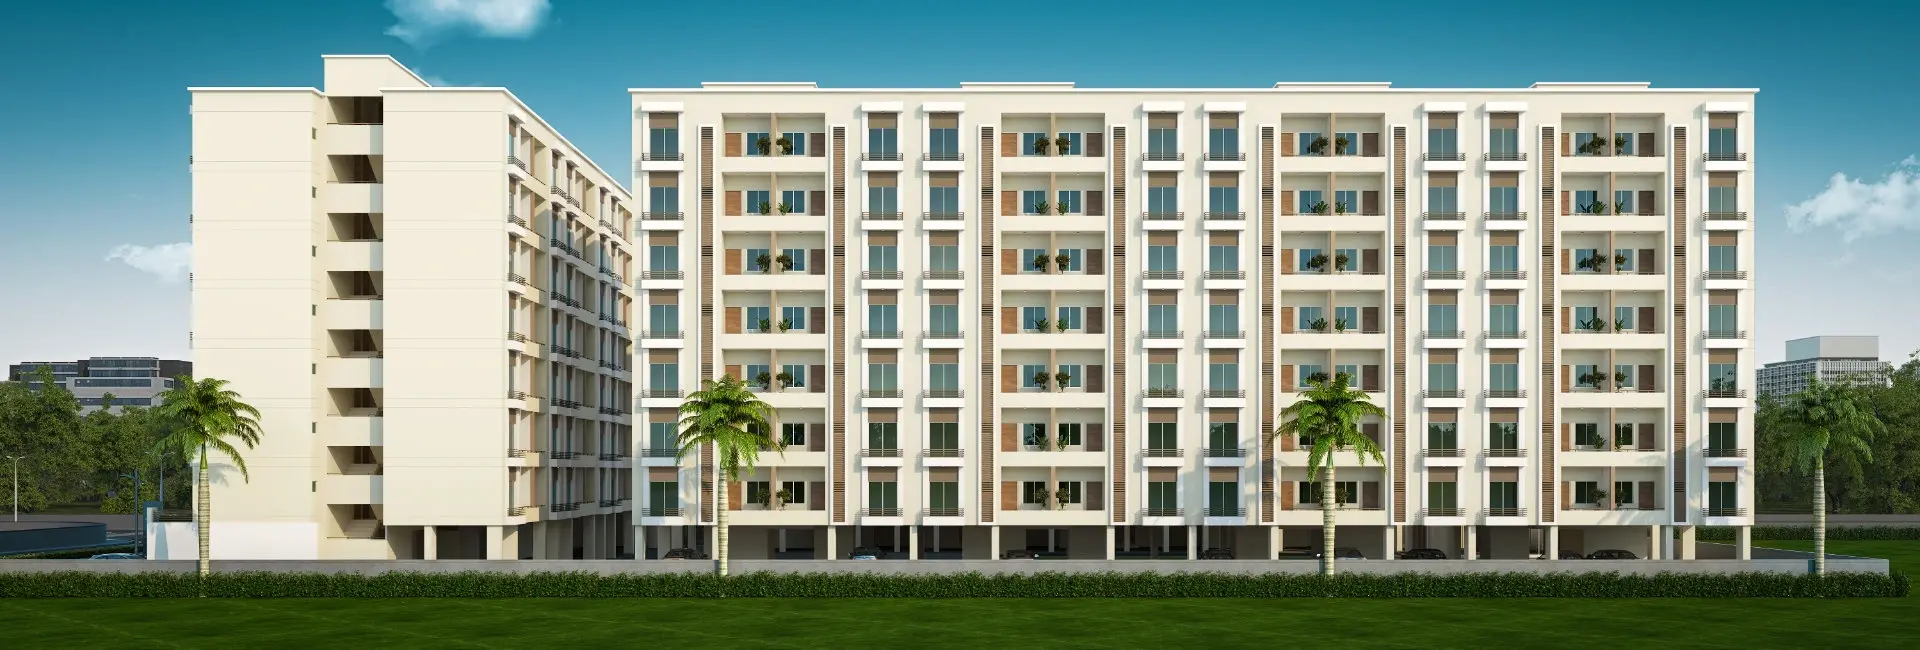 Residential and commercial apartment in Waghodia Road, Vadodara - Shree Siddheshwar Hillstone